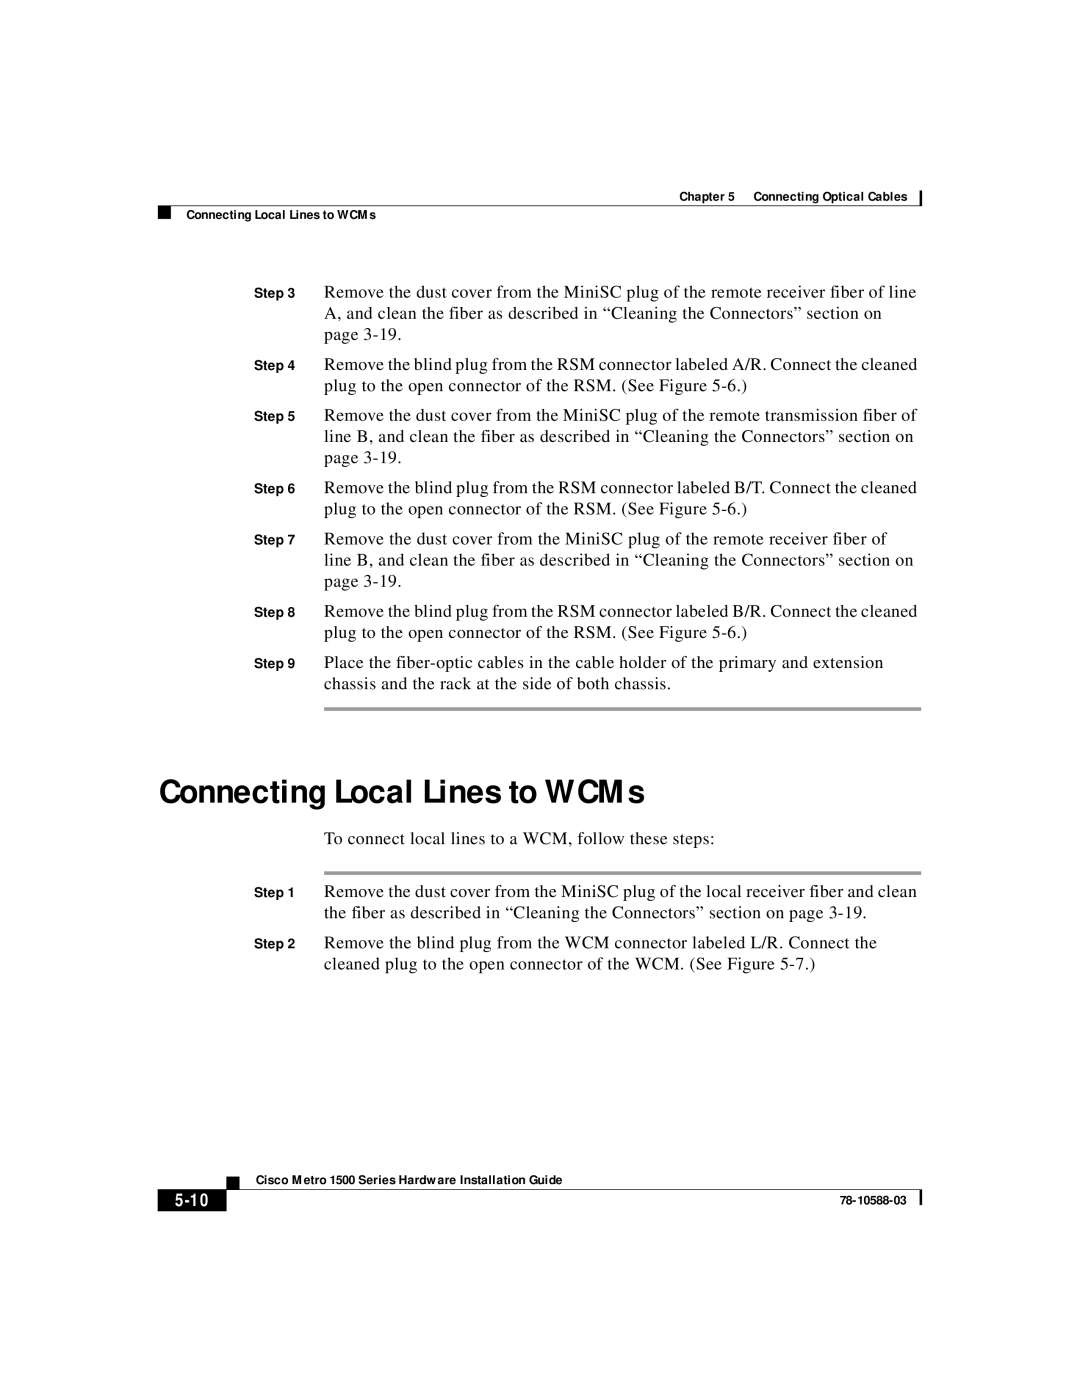 Cisco Systems 1500 manual Connecting Local Lines to WCMs, 5-10 